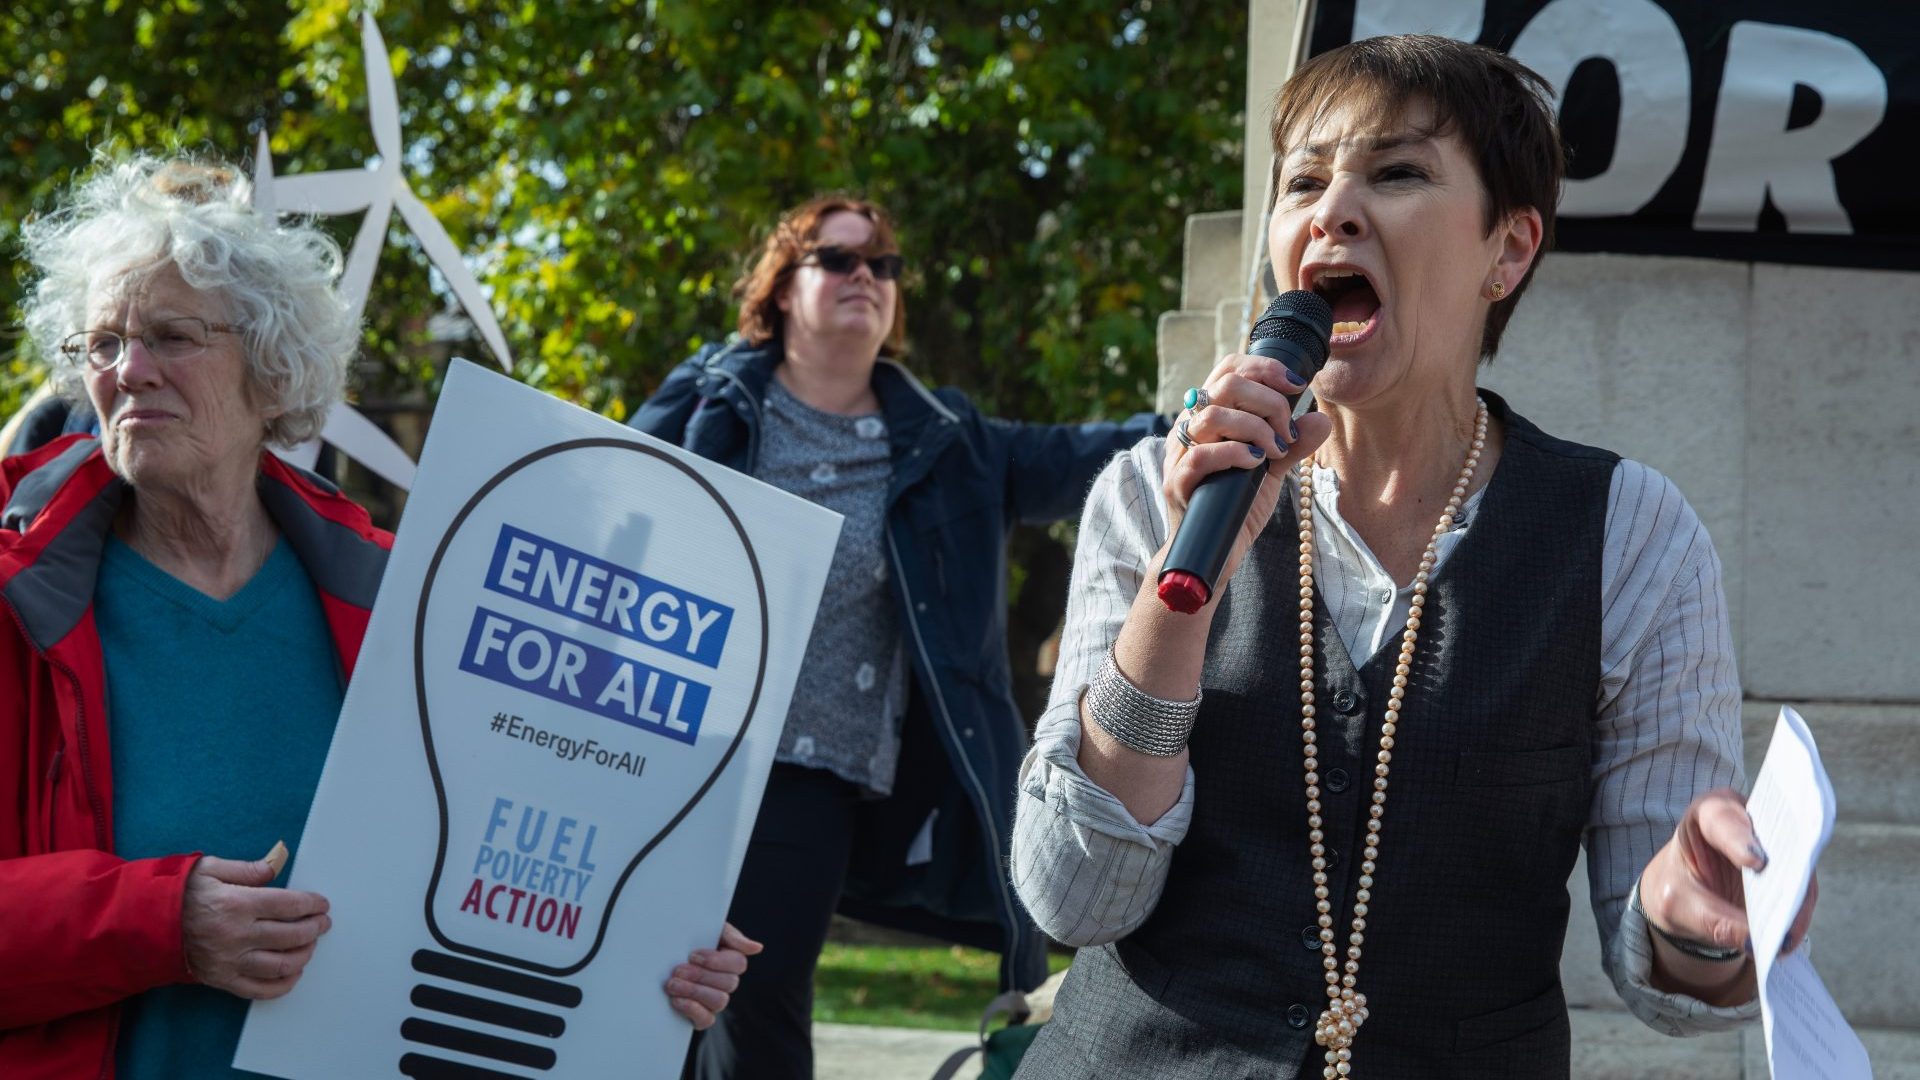 Caroline Lucas, Green MP for Brighton Pavilion, addresses campaigners from Fuel Poverty Action. Photo: Mark Kerrison/In Pictures via Getty Images